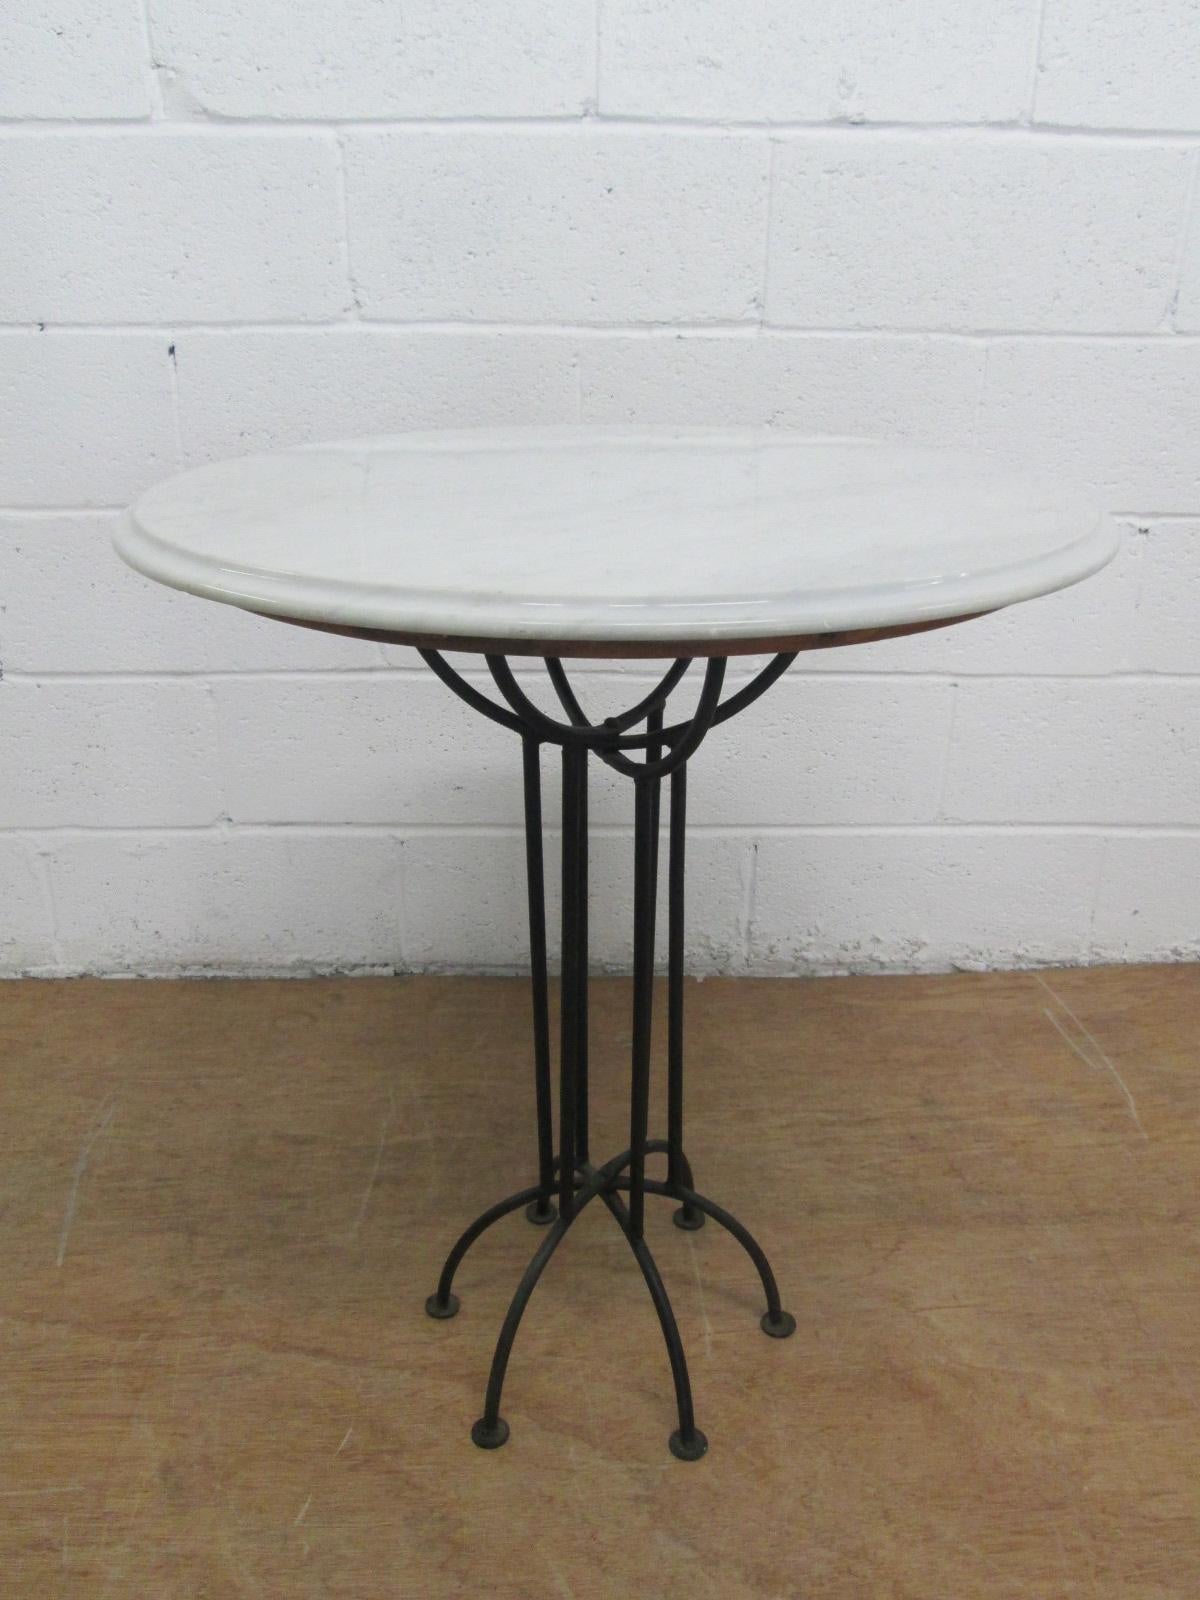 Pair of wrought iron and Italian marble-top tables. Has a spider style base. Gueridon table, occasional table.